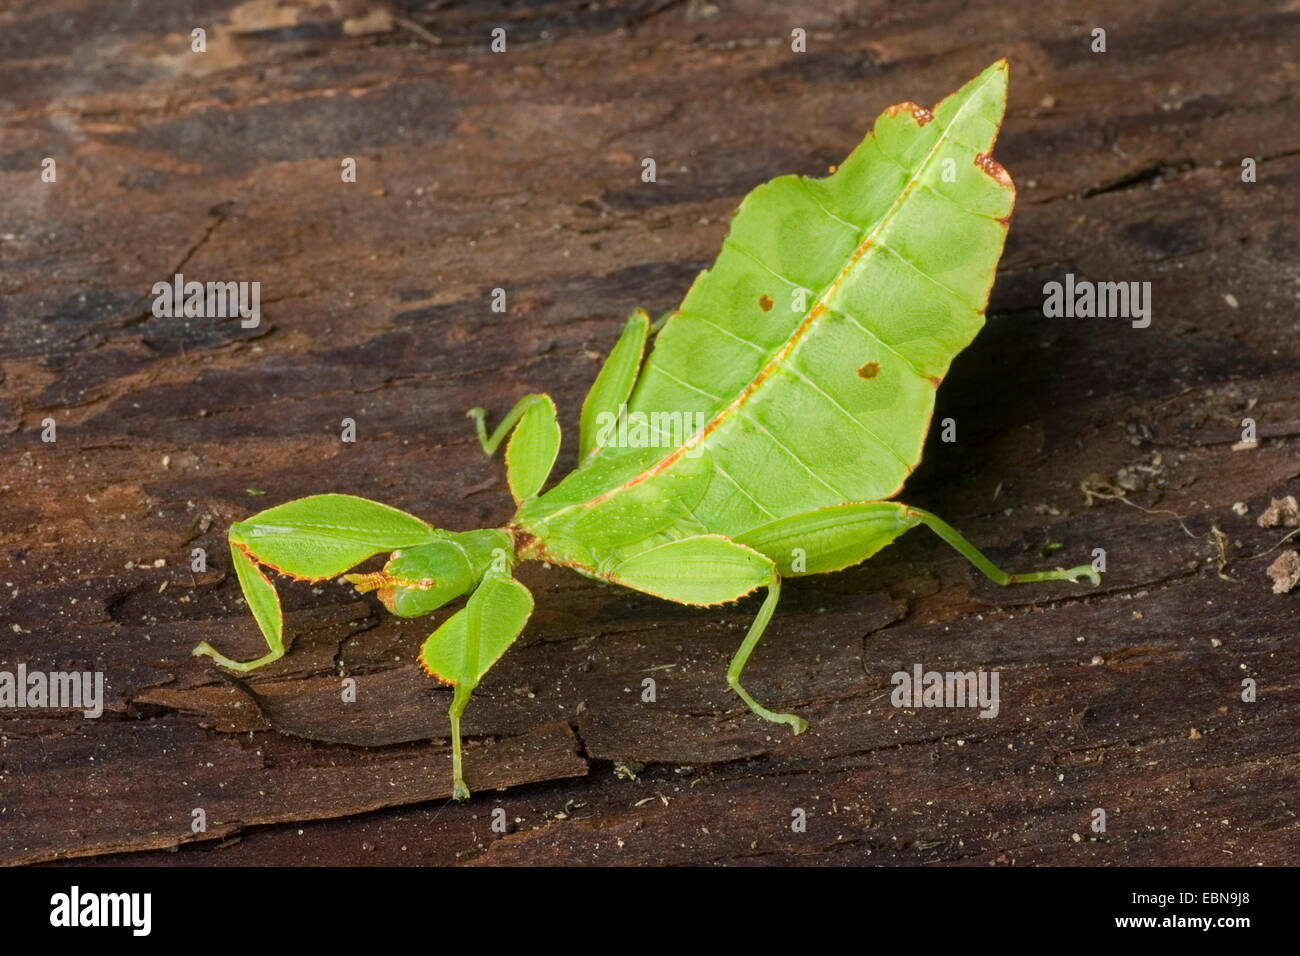 Leaf-Insect, leaf insect (Phyllium siccifolium), on bark Stock Photo